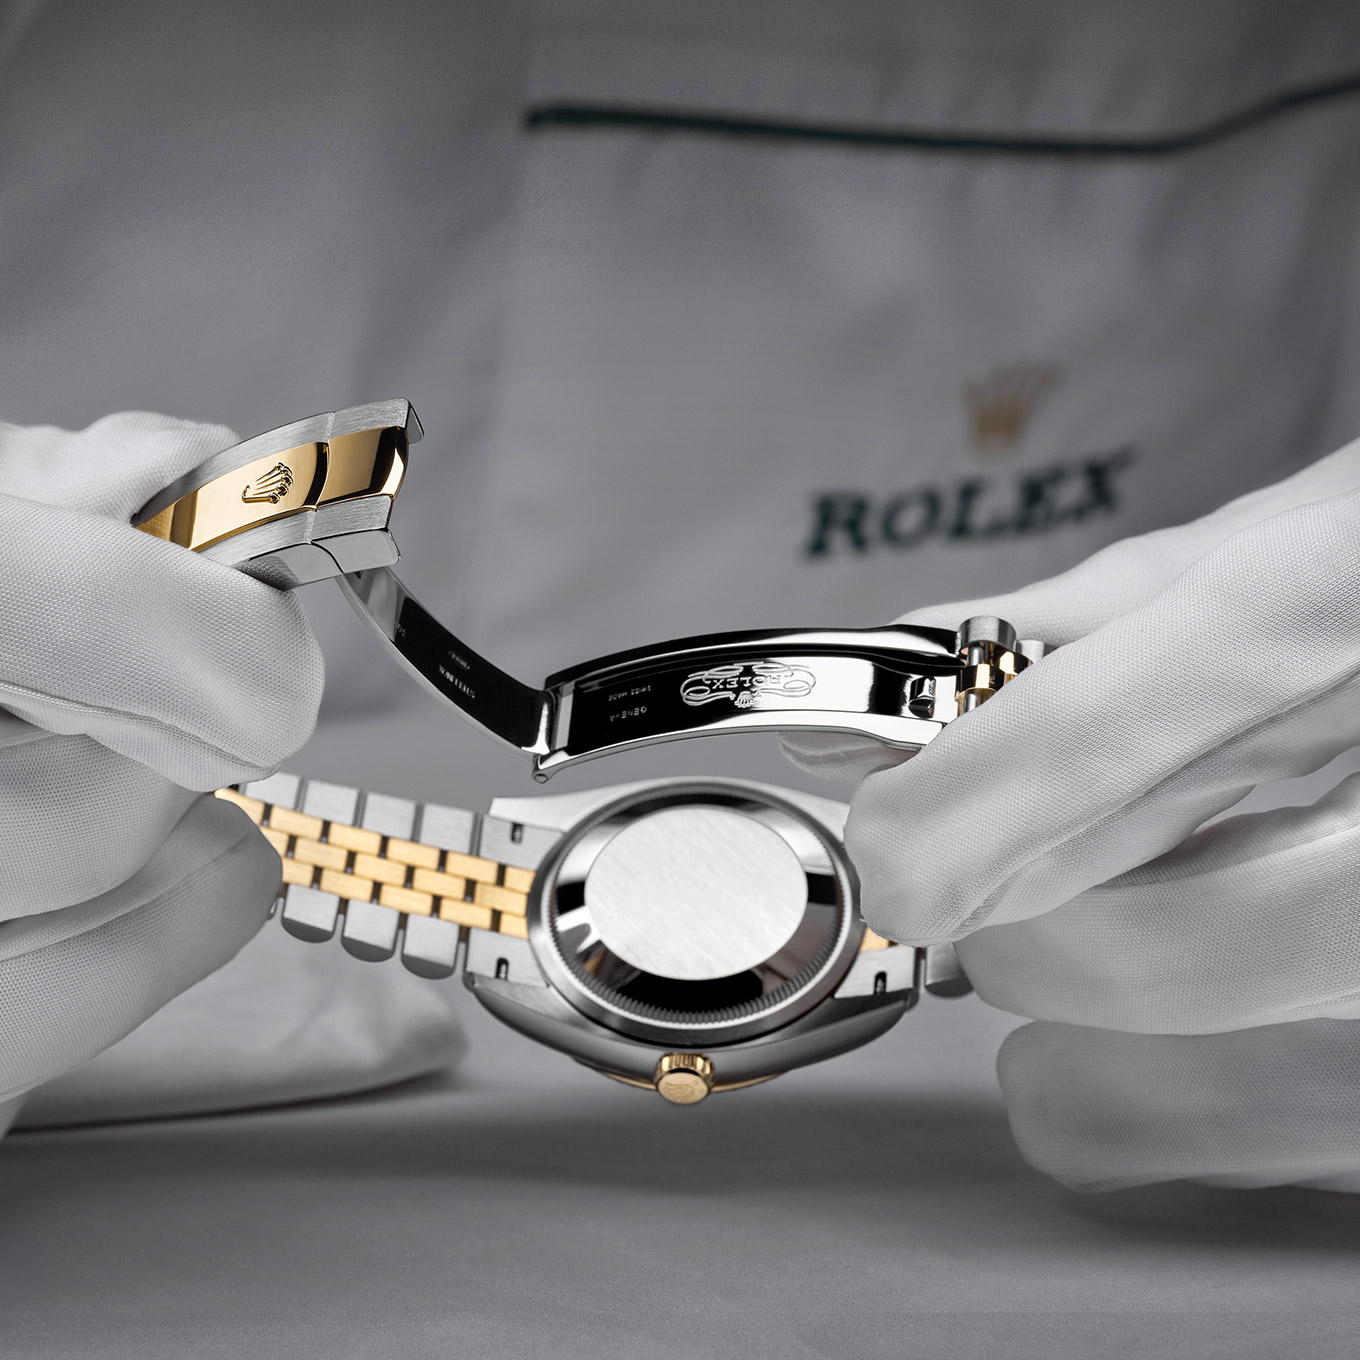 Rolex servicing at Packouz Jewelers in Portland, OR